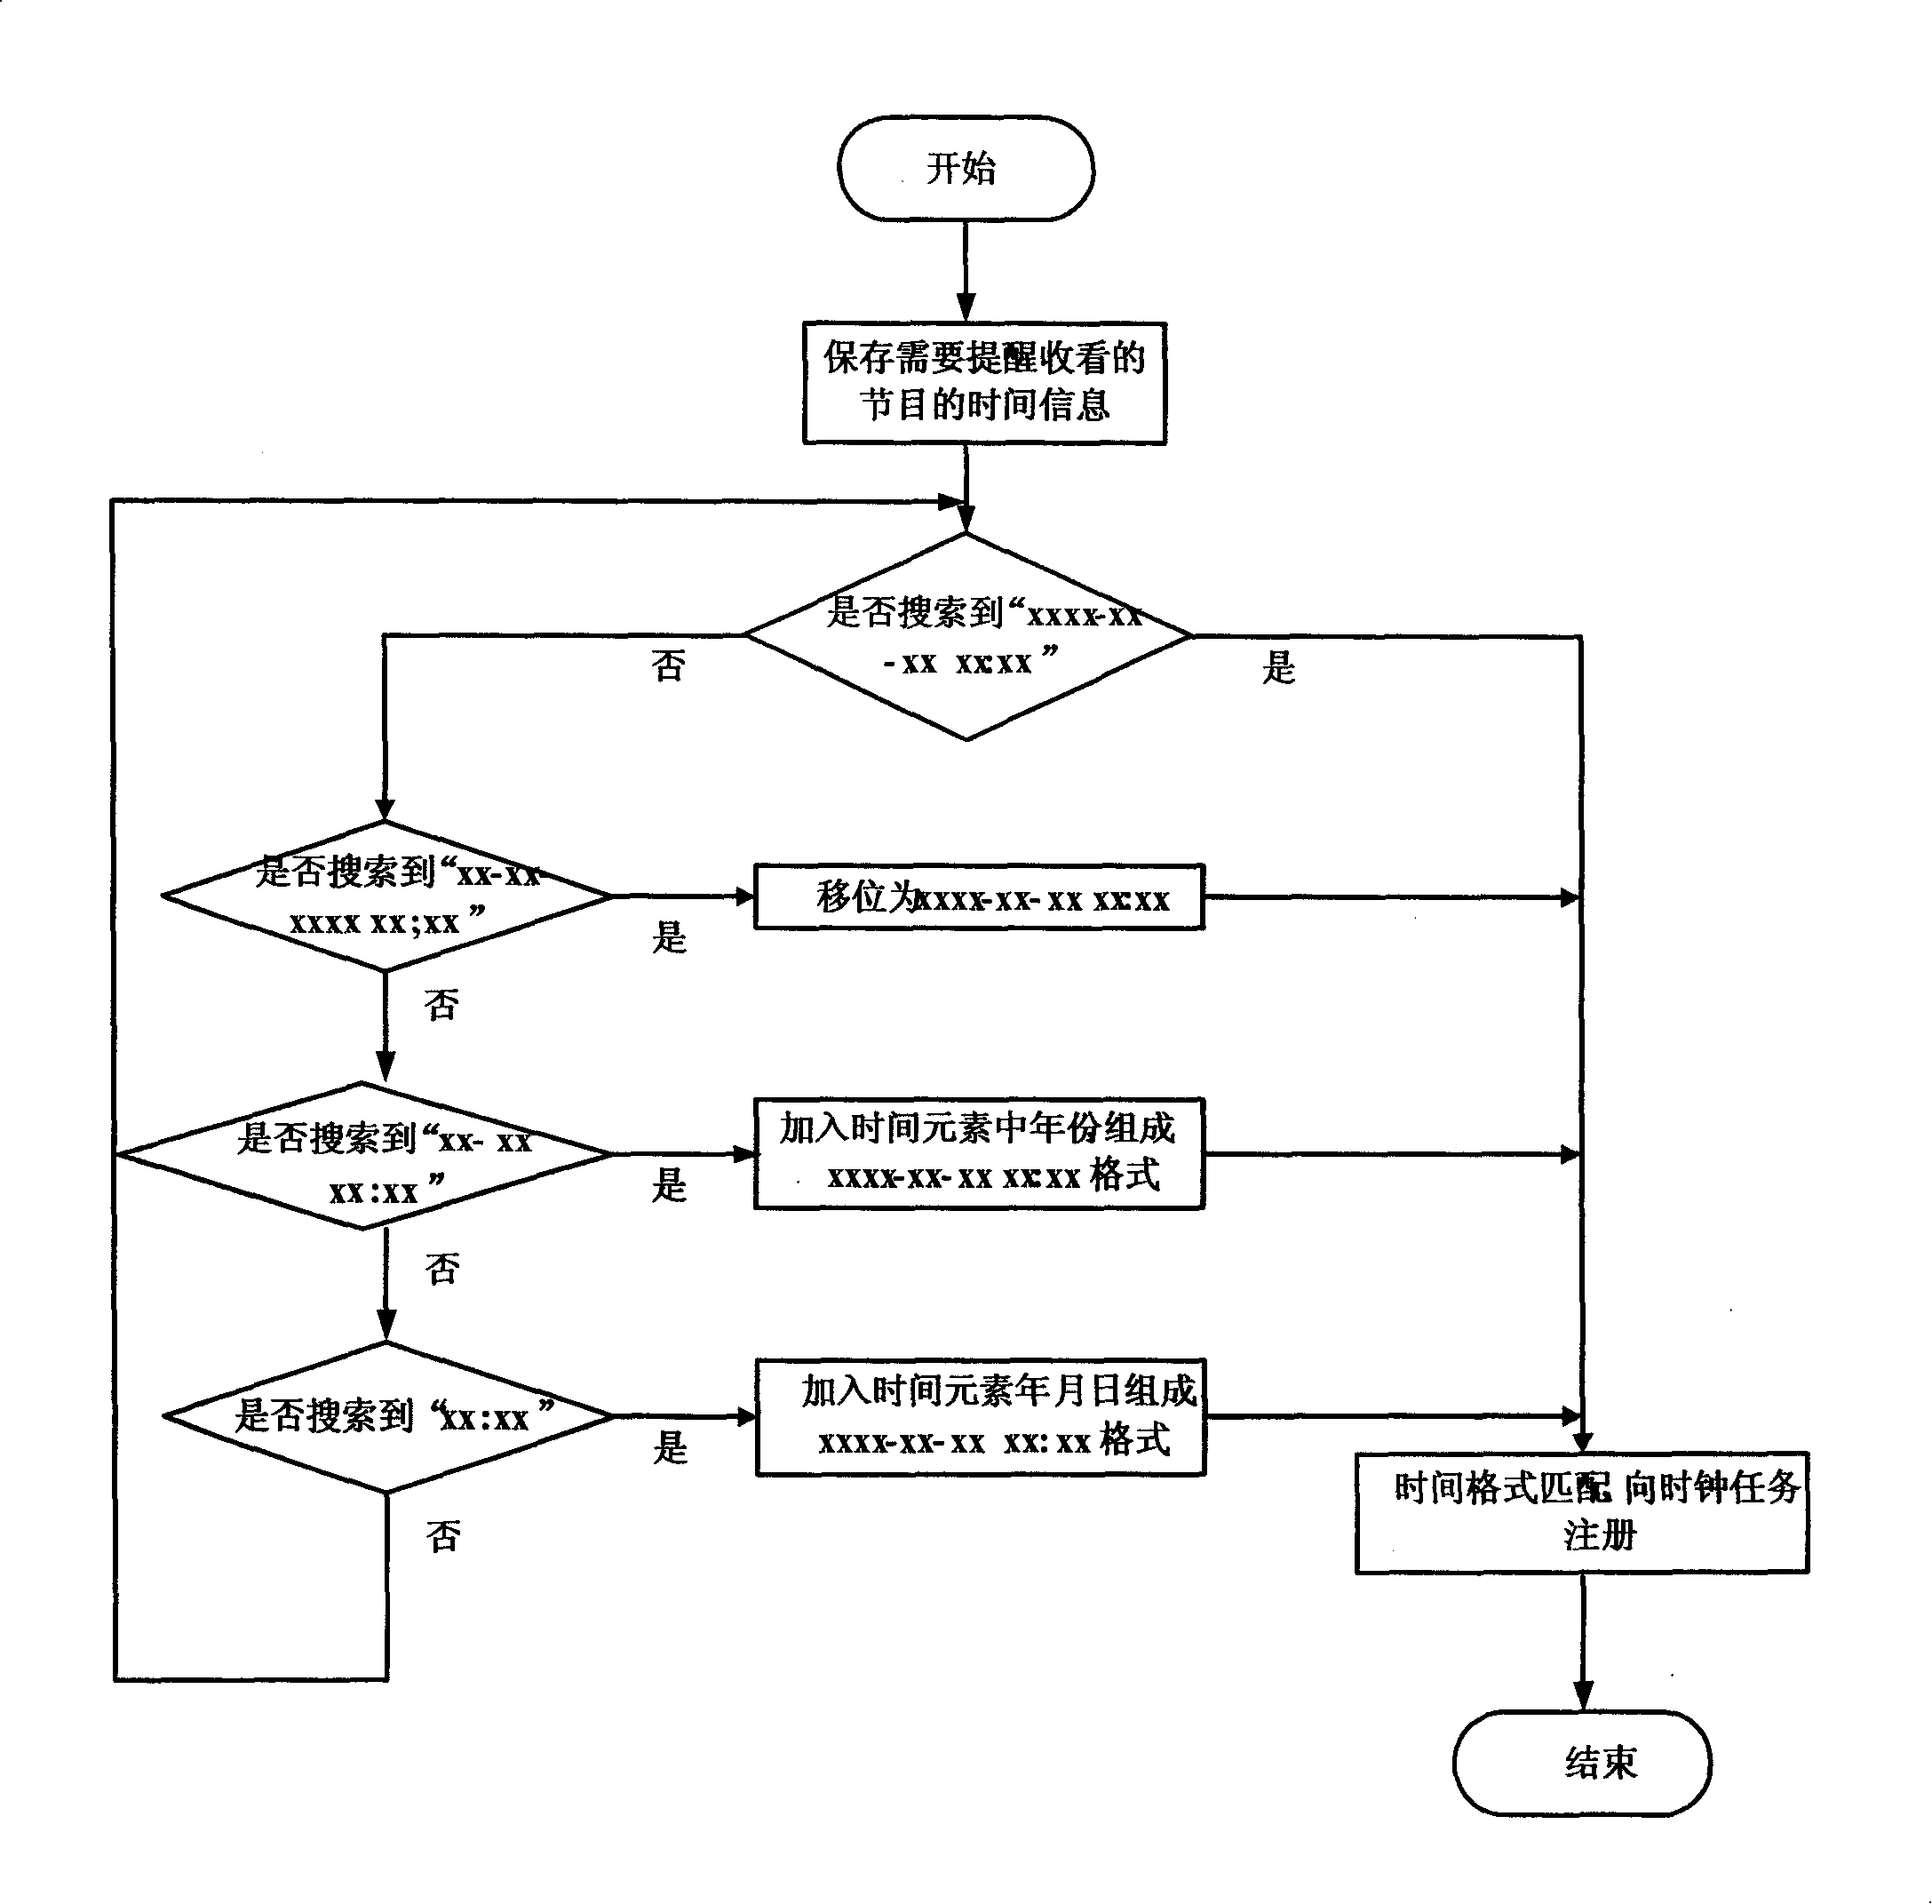 Mobile terminal and method for reminding of watching television program